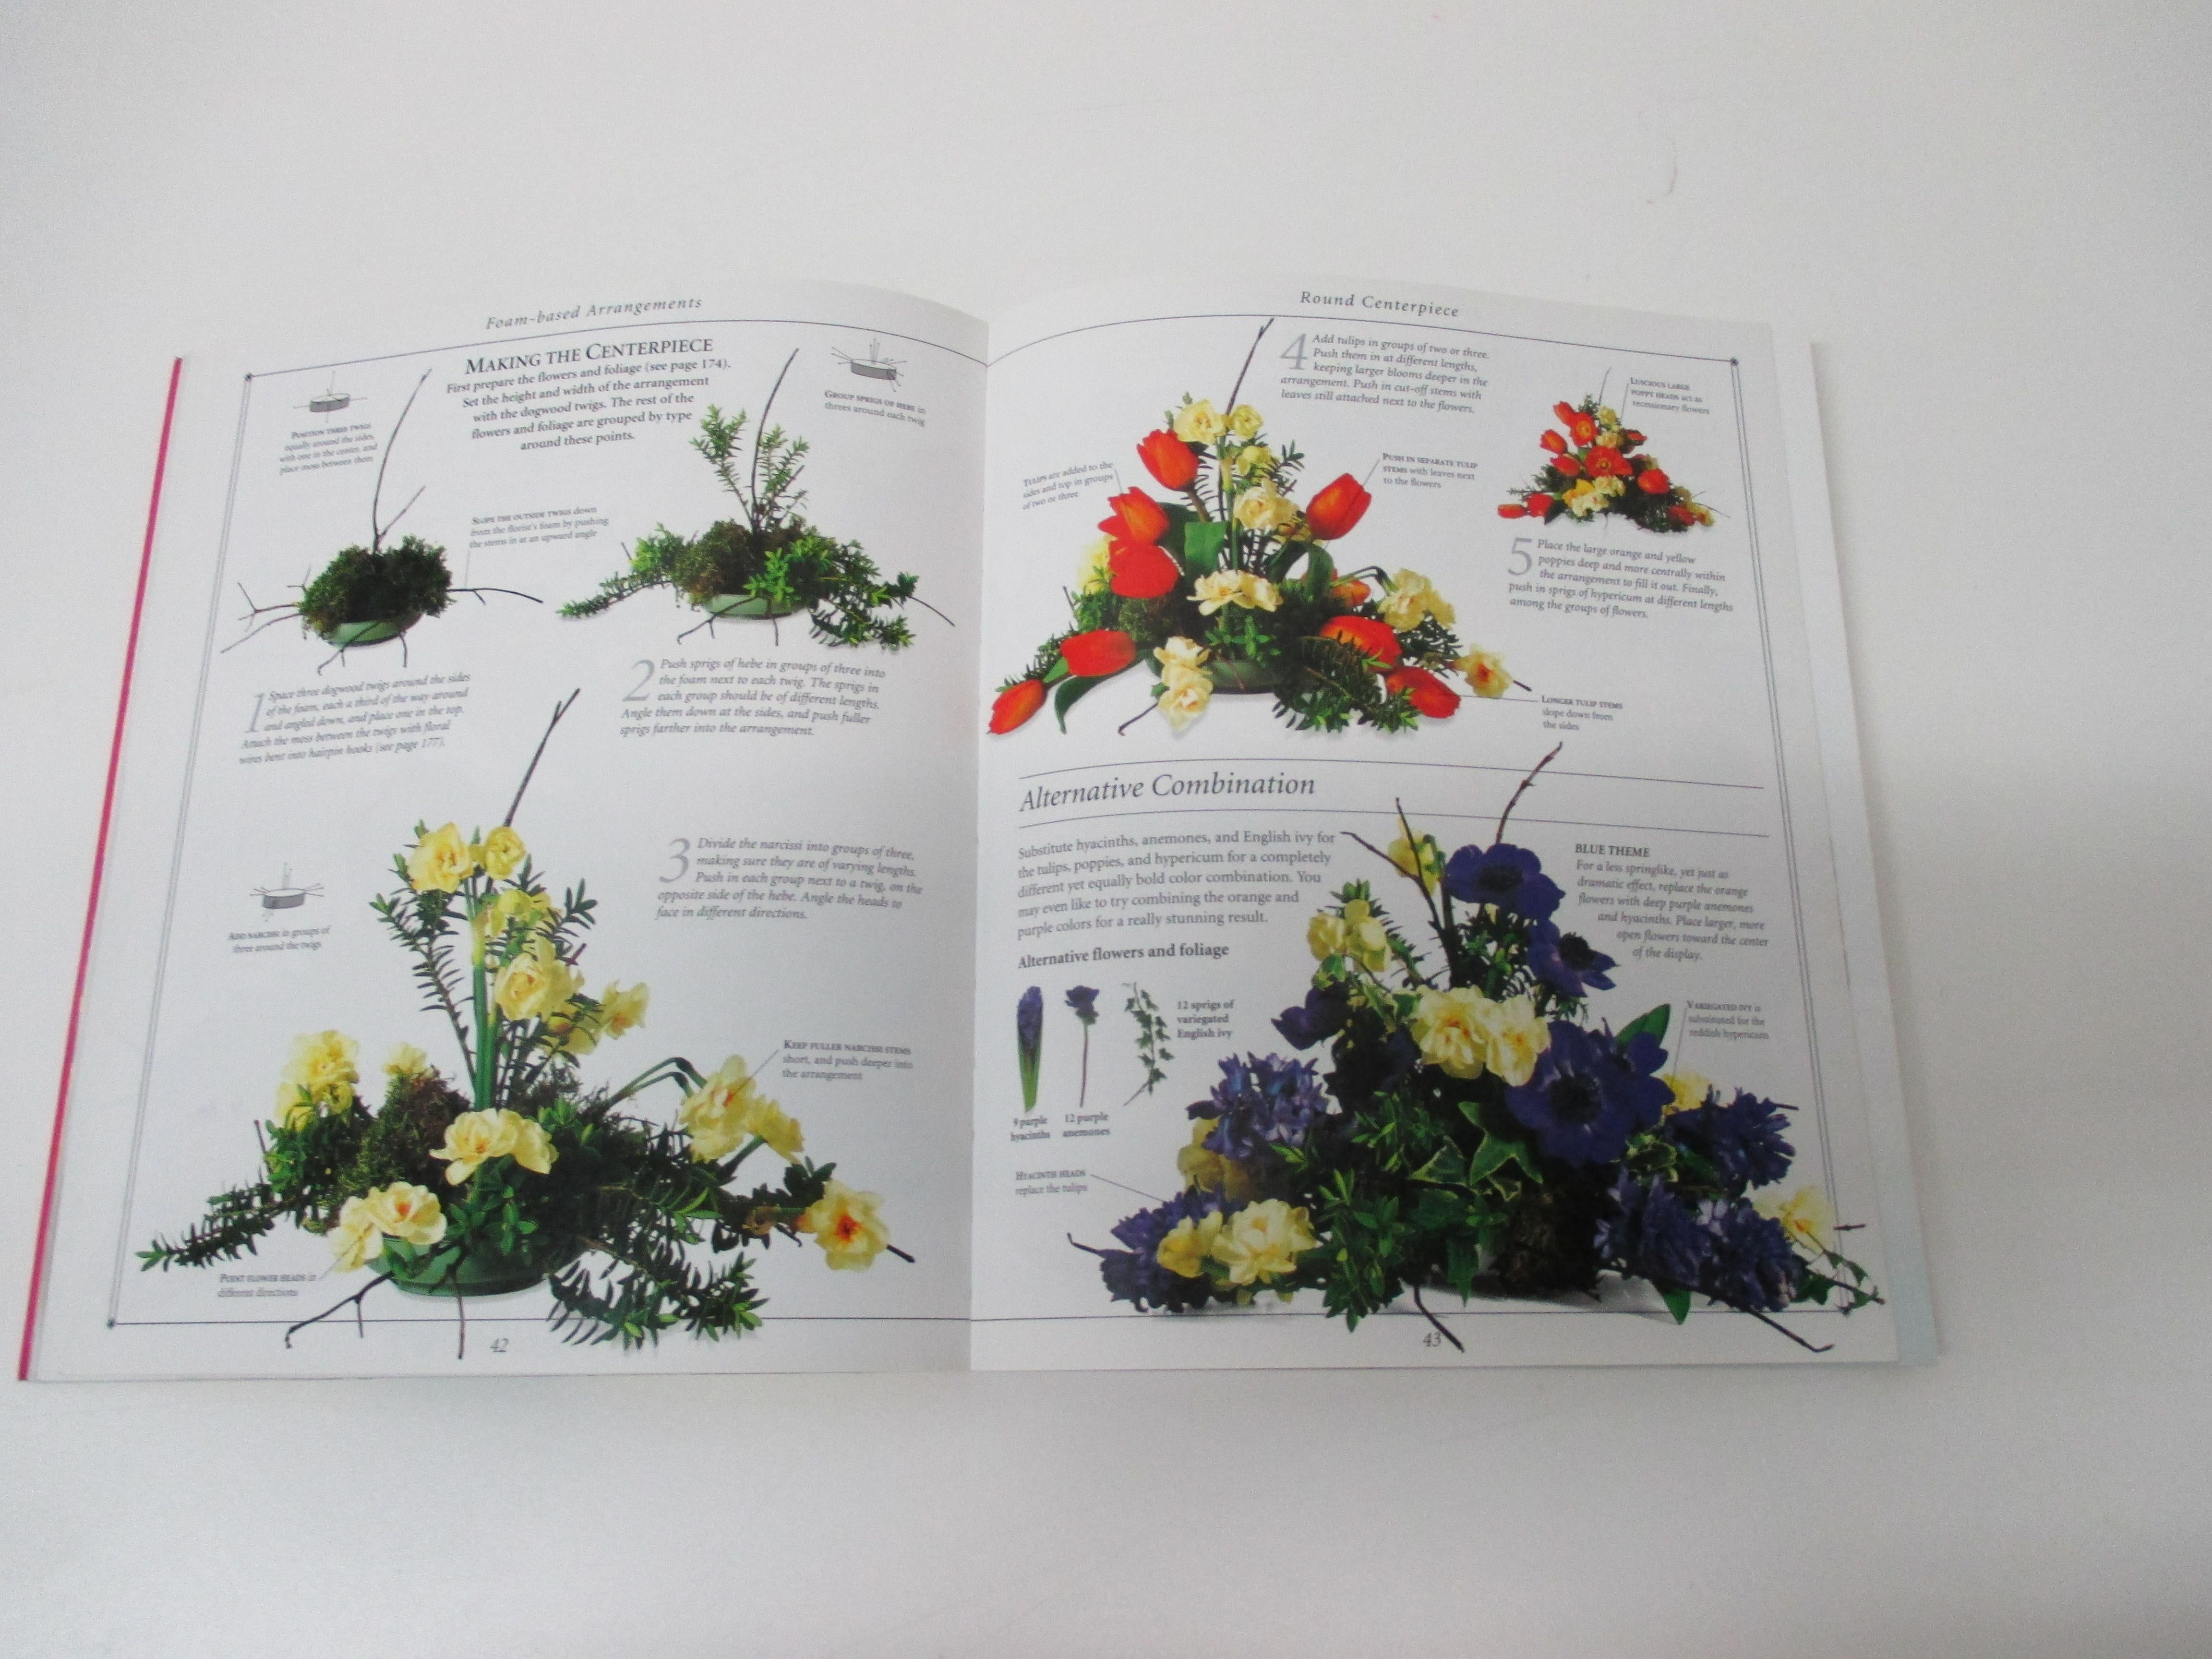 The Complete Guide to Flower Arranging
Although her earlier book, Jane Packer's New Flower Arranging, was a feast for the eyes, specific instructional material was kept to a minimum. Her new book is as practical as it is gorgeous, with beautifully